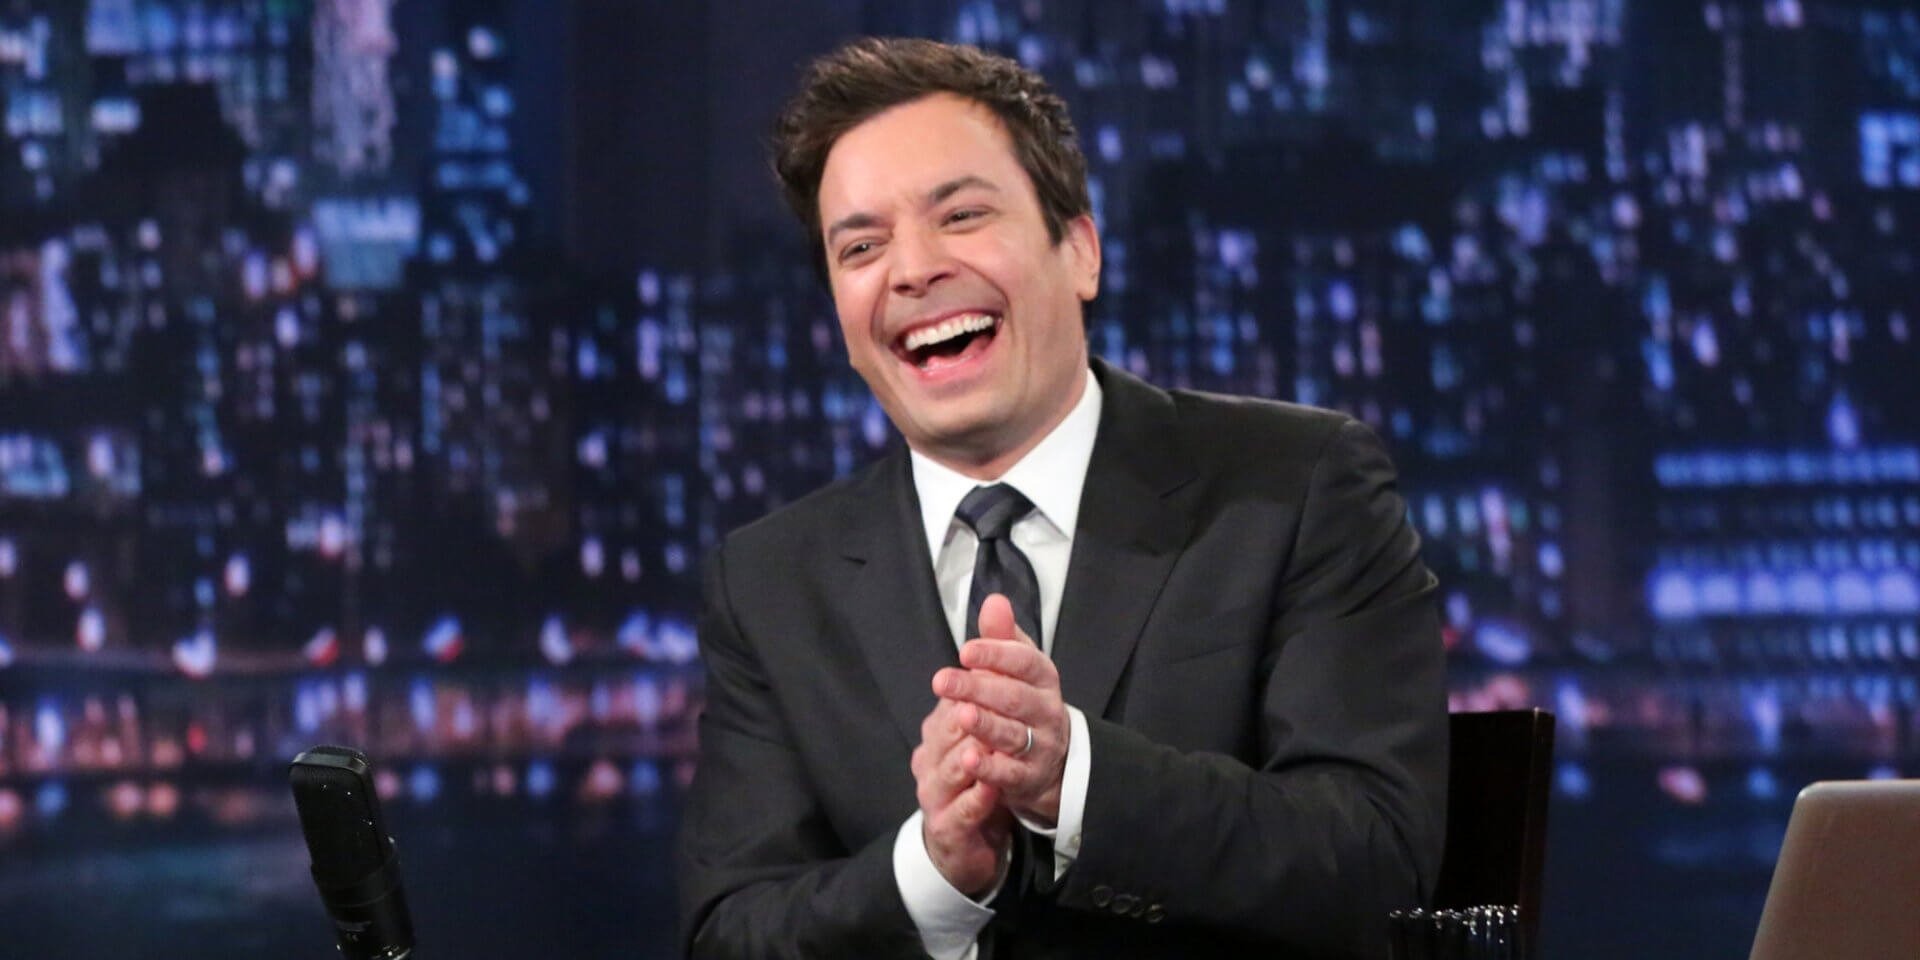 How To Watch Jimmy Fallon Live Without Cable